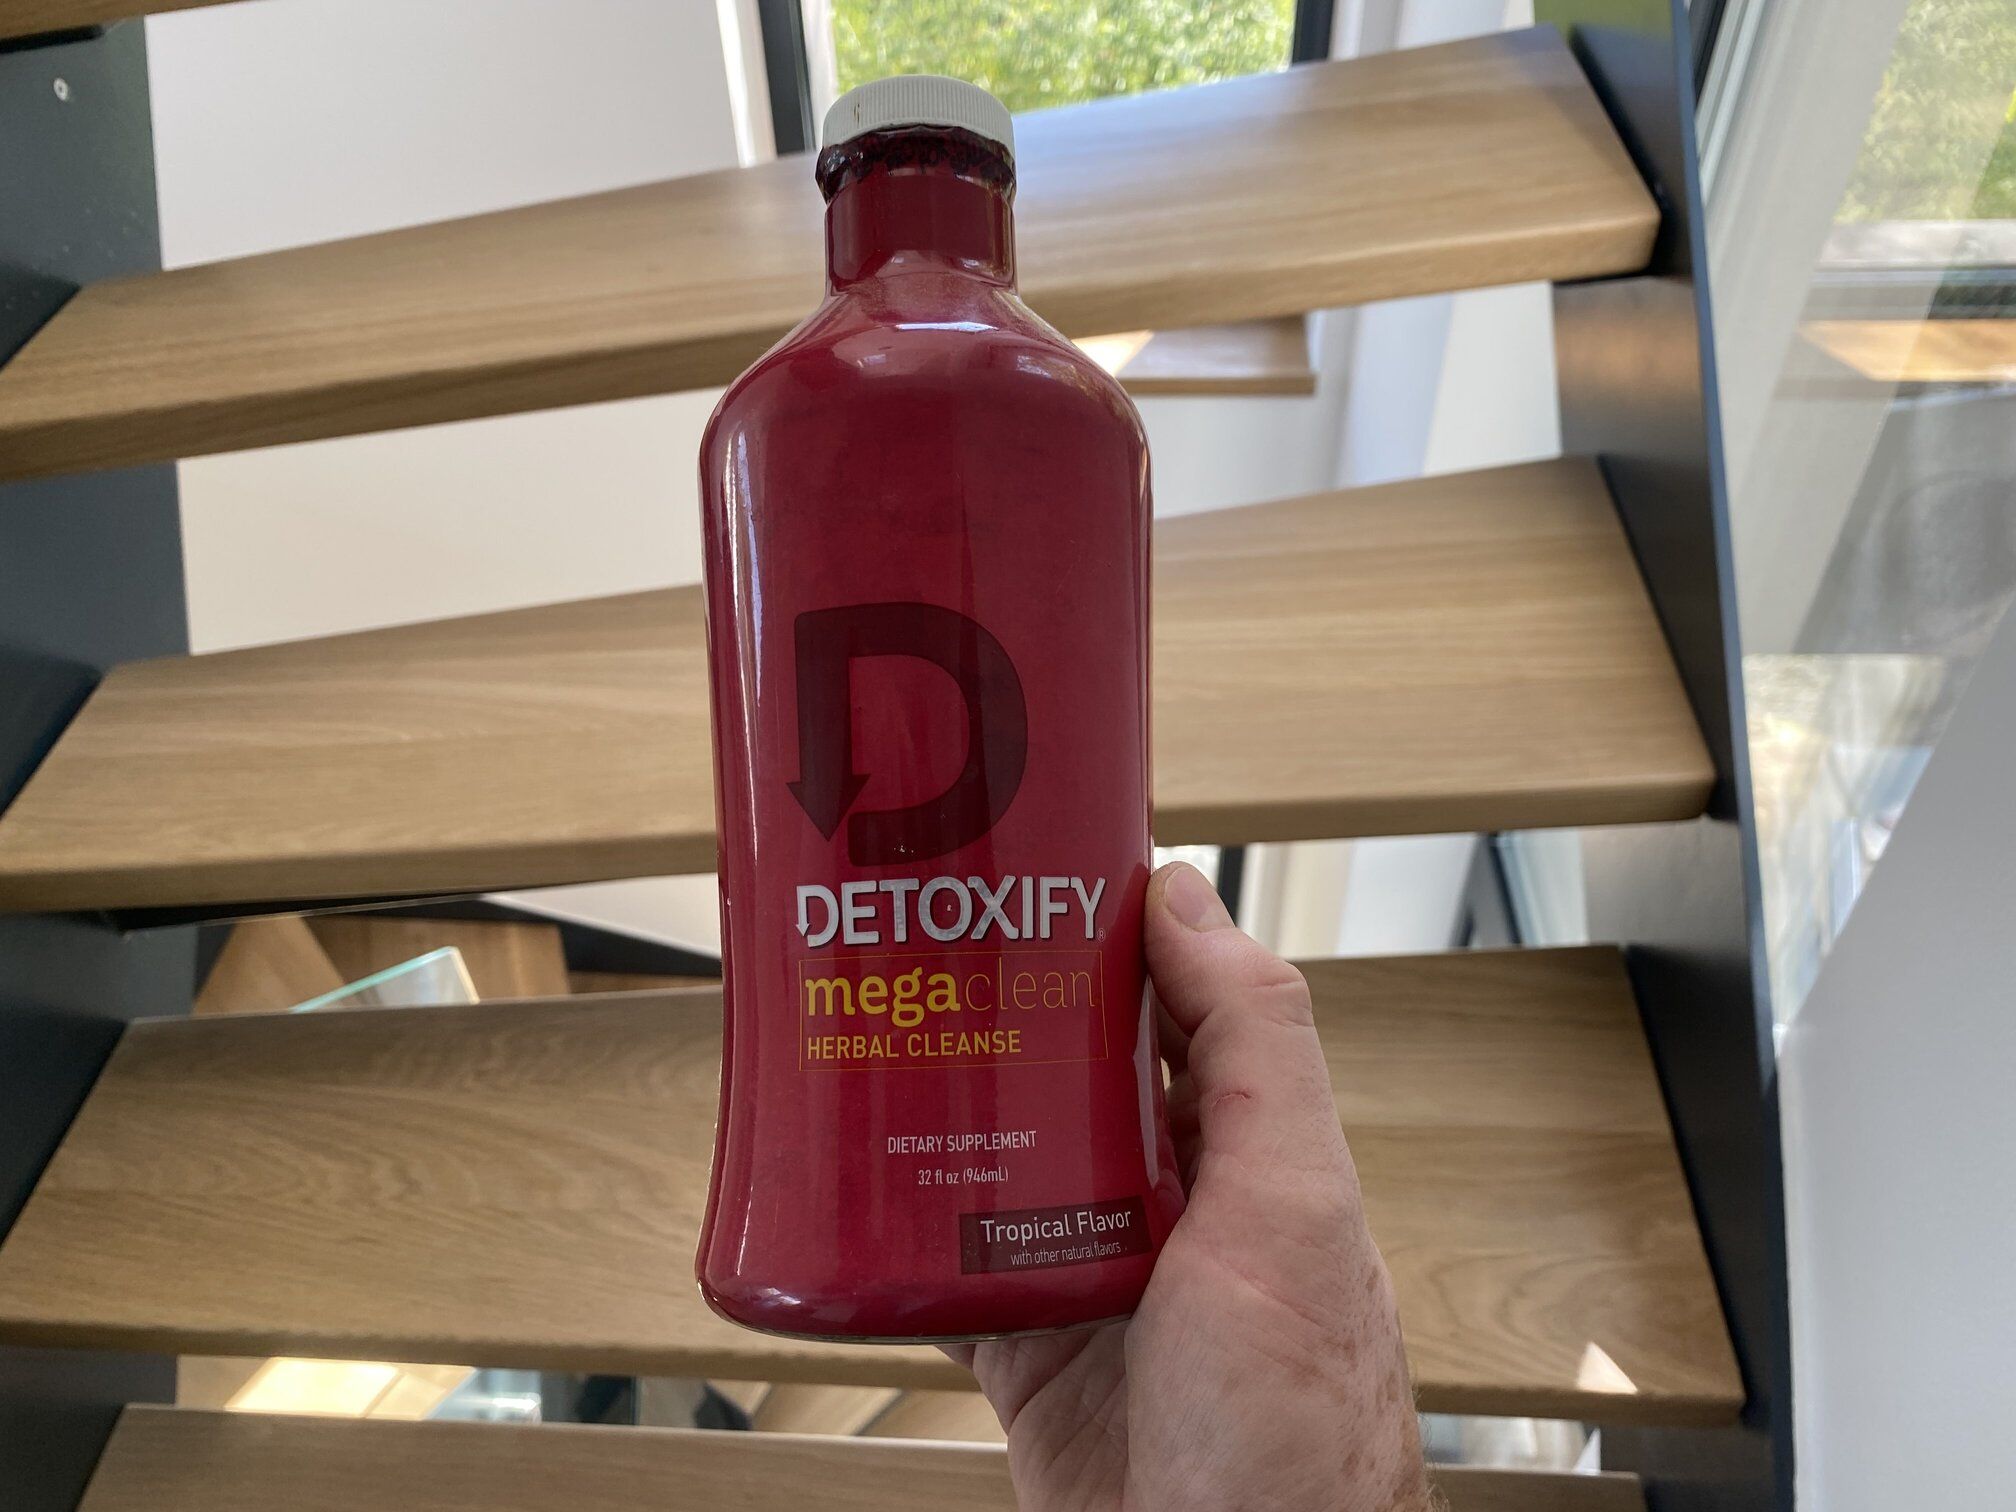 Detoxify Mega Clean Detox Review: Does This Detox Drink Really Work?